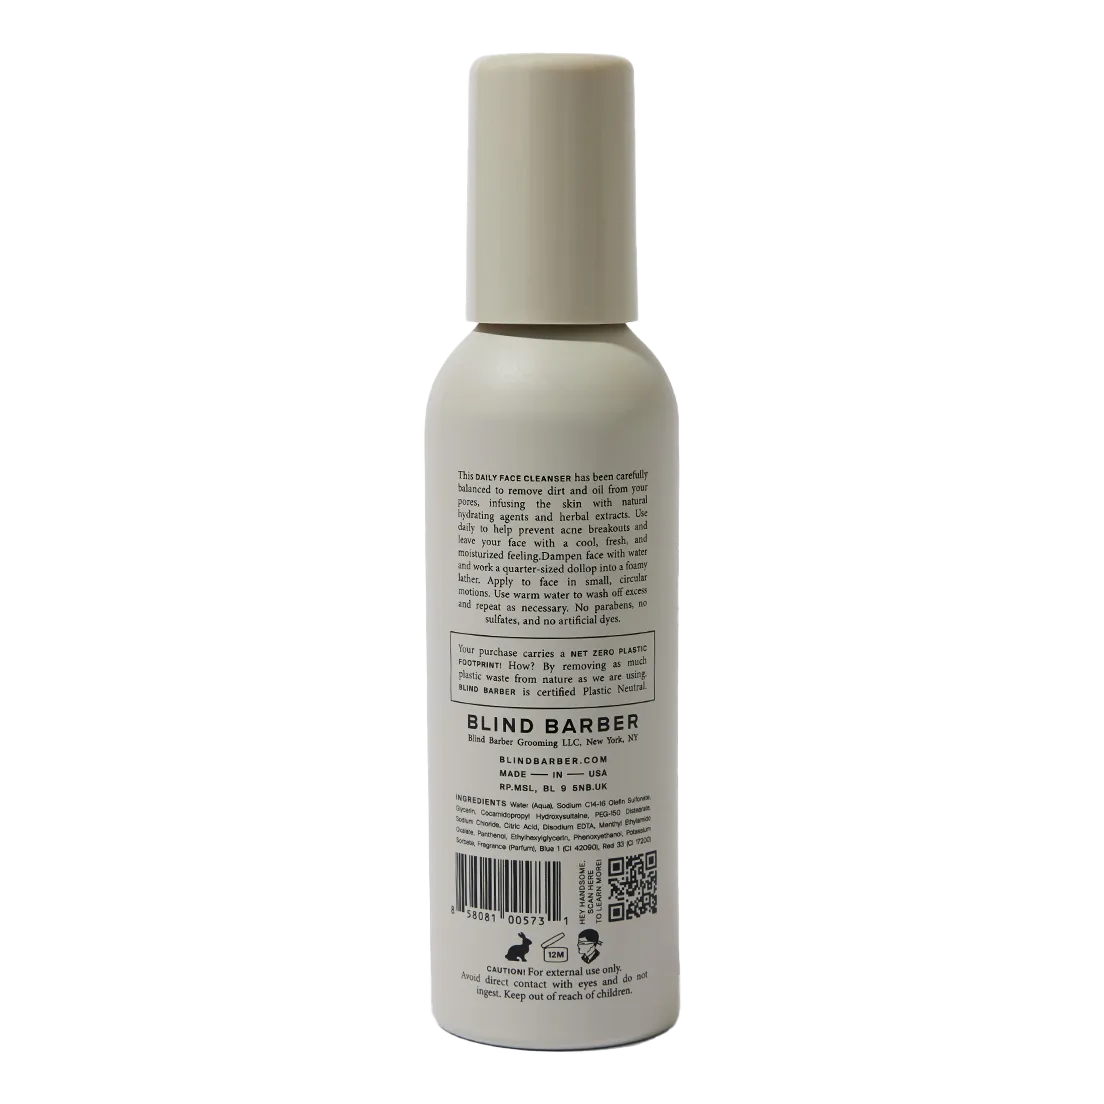 Blind Barber Watermint Gin Daily Face Cleanser 